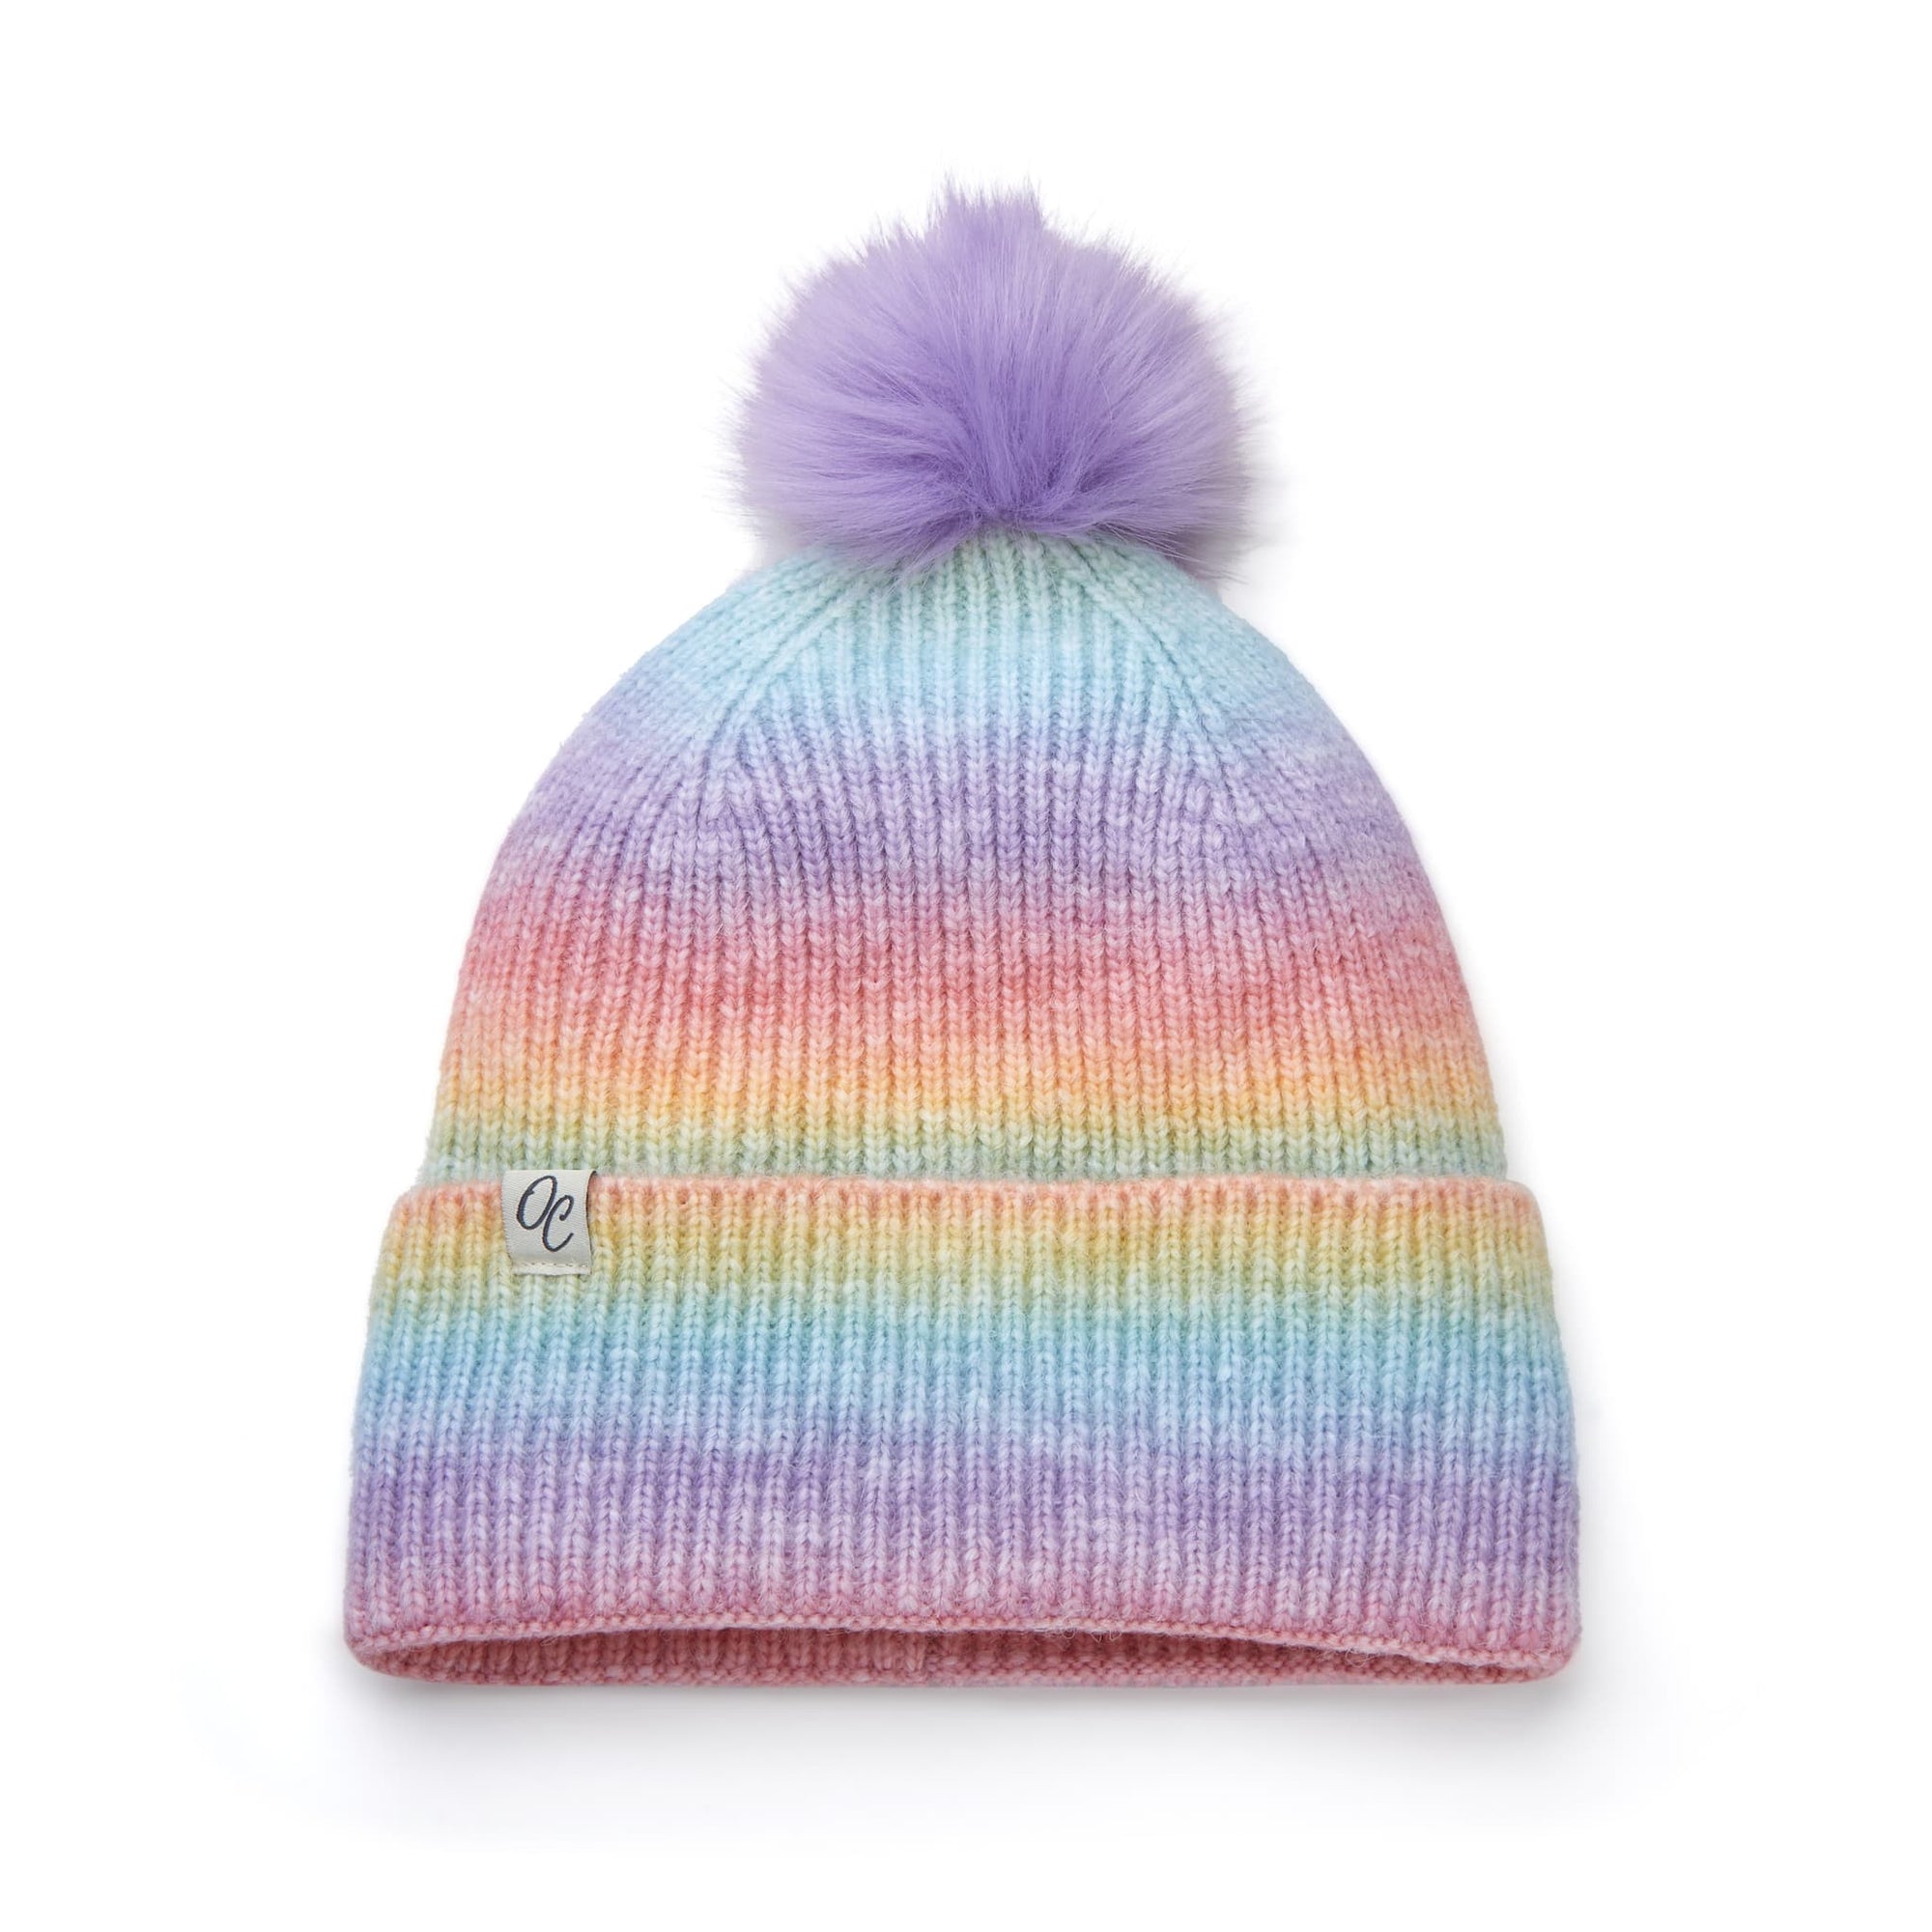 Only Curls Satin Lined Knitted Beanie Hat - Rainbow with Pom Pom - Only Curls